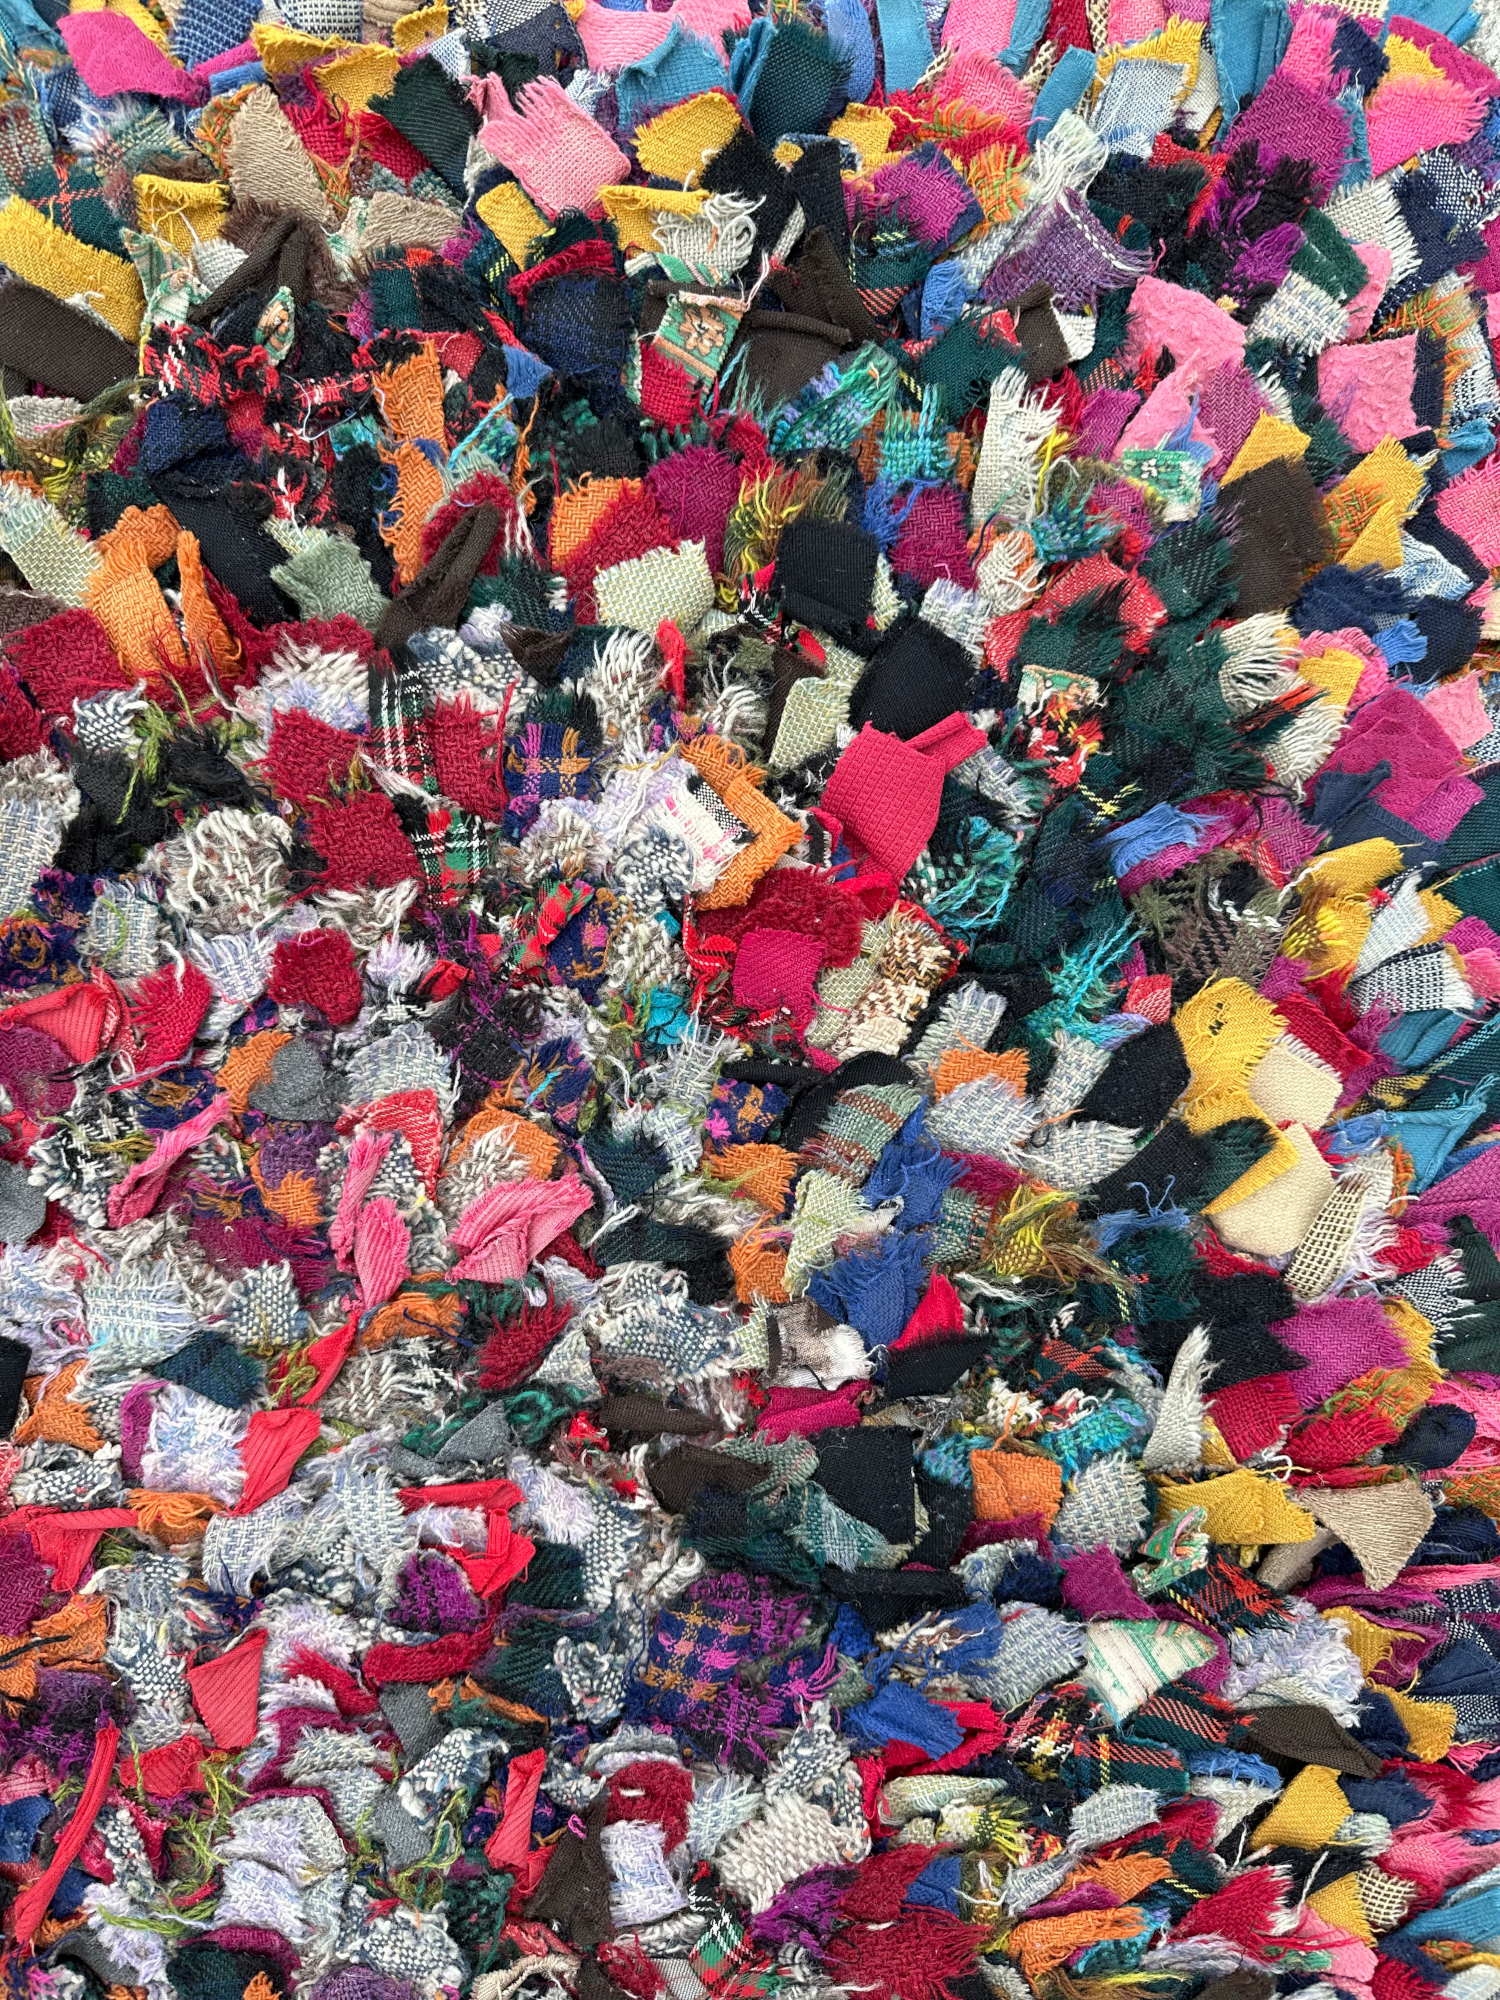 An early 20th century rag rug, 130 by 95cm. - Image 2 of 3